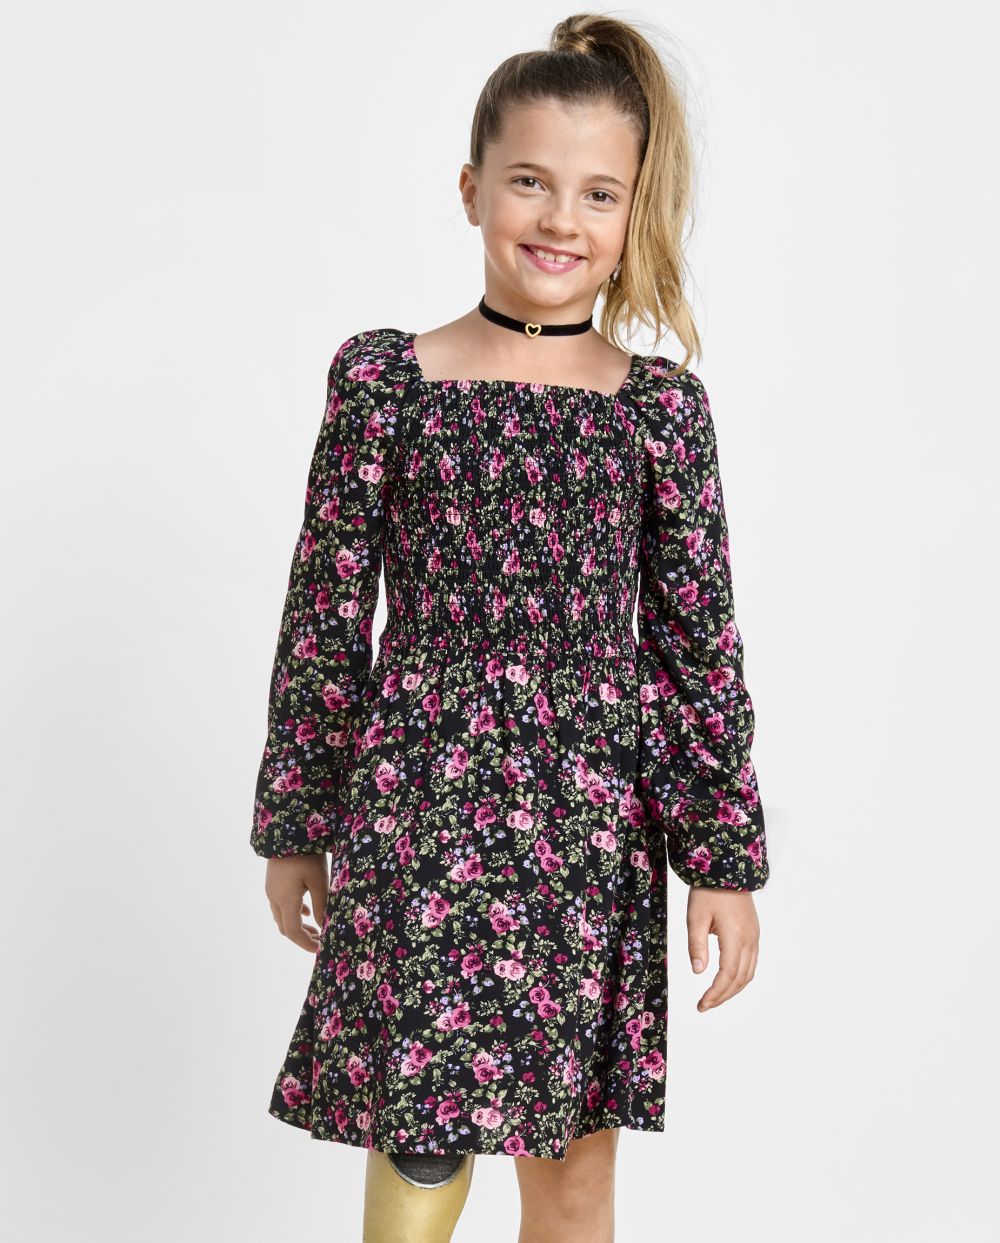 Girls Floral Print Above the Knee Smocked Square Neck Long Sleeves Rayon Dress